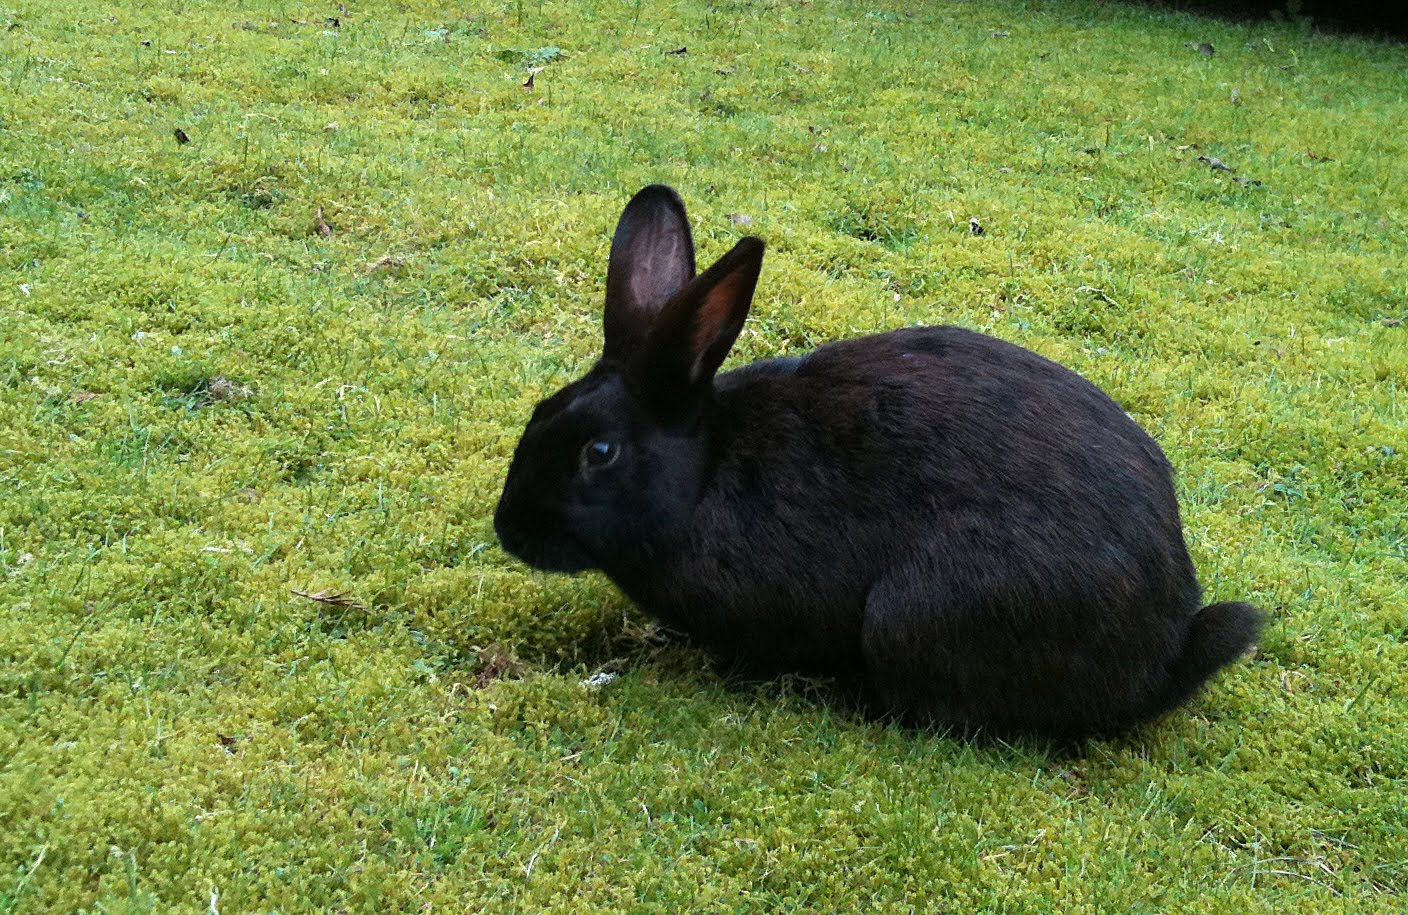 Black Rabbit at work! How cute is that!!!!! No carrot today bunny - but stick around tomorrow!